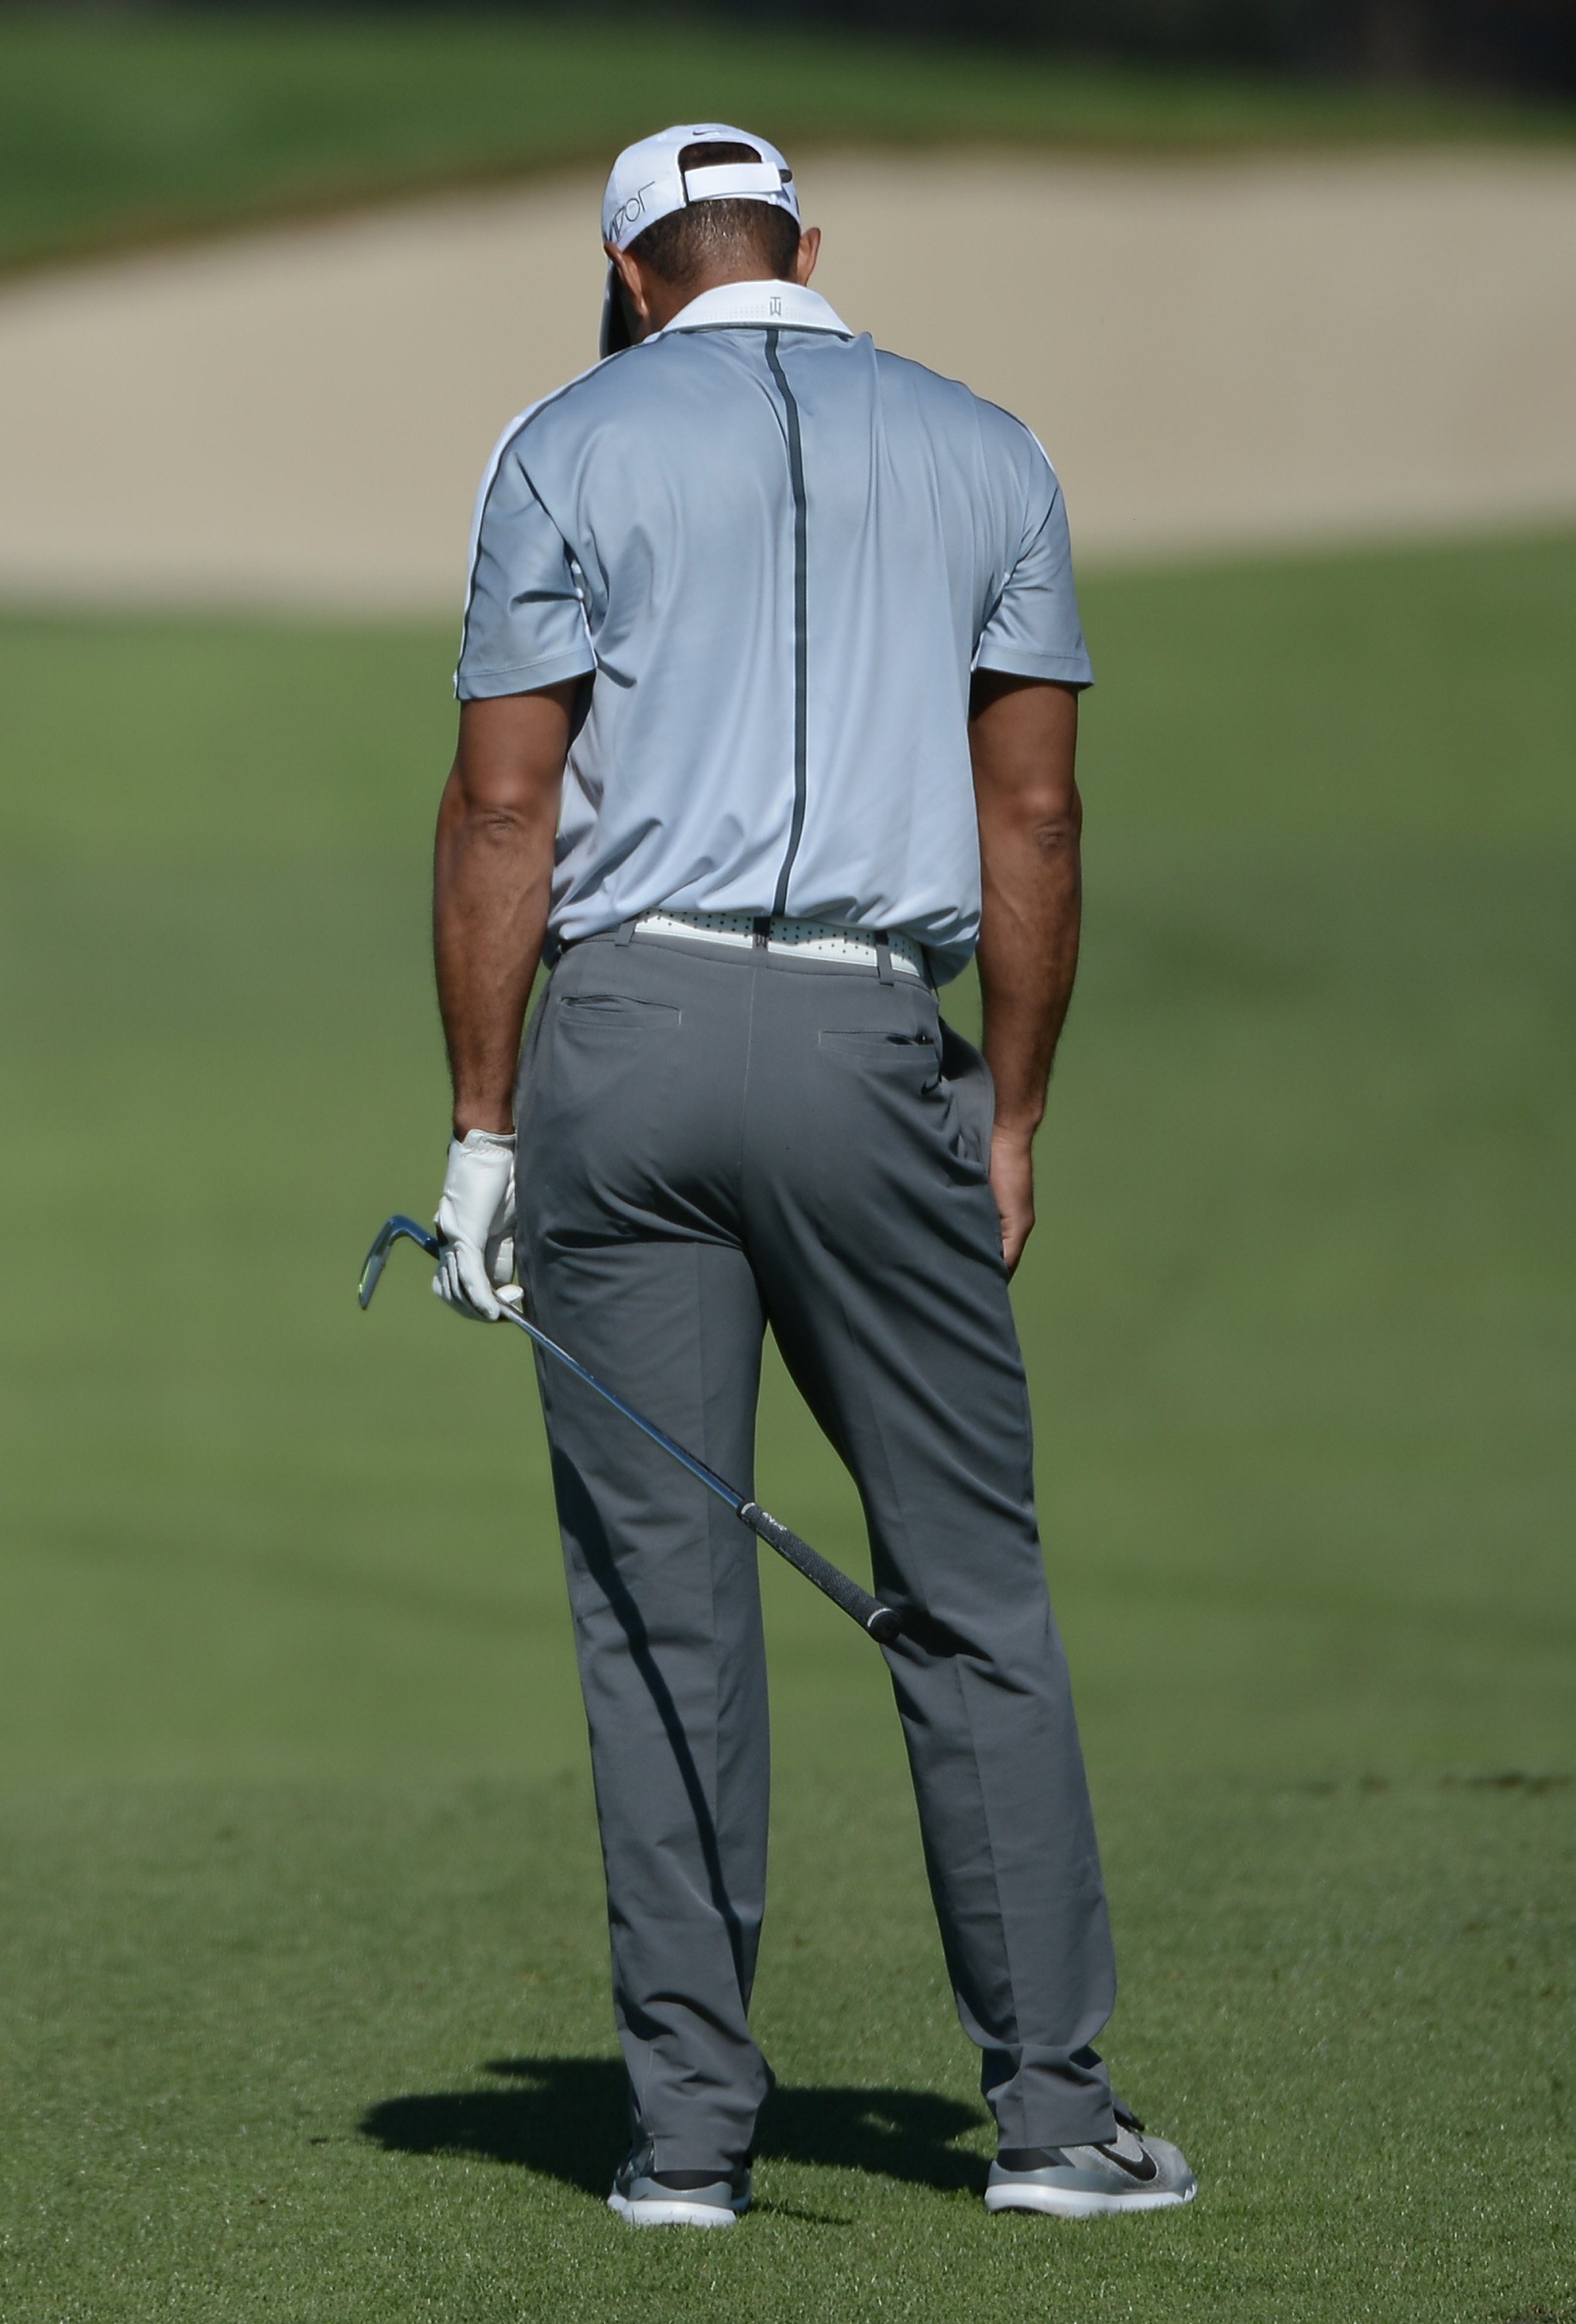 Tiger Woods reacts after playing his shot from the 13th fairway on the north course during the first round of the Farmers Insurance Open at Torrey Pines Golf Course on Feb. 5, 2015 in La Jolla, California.